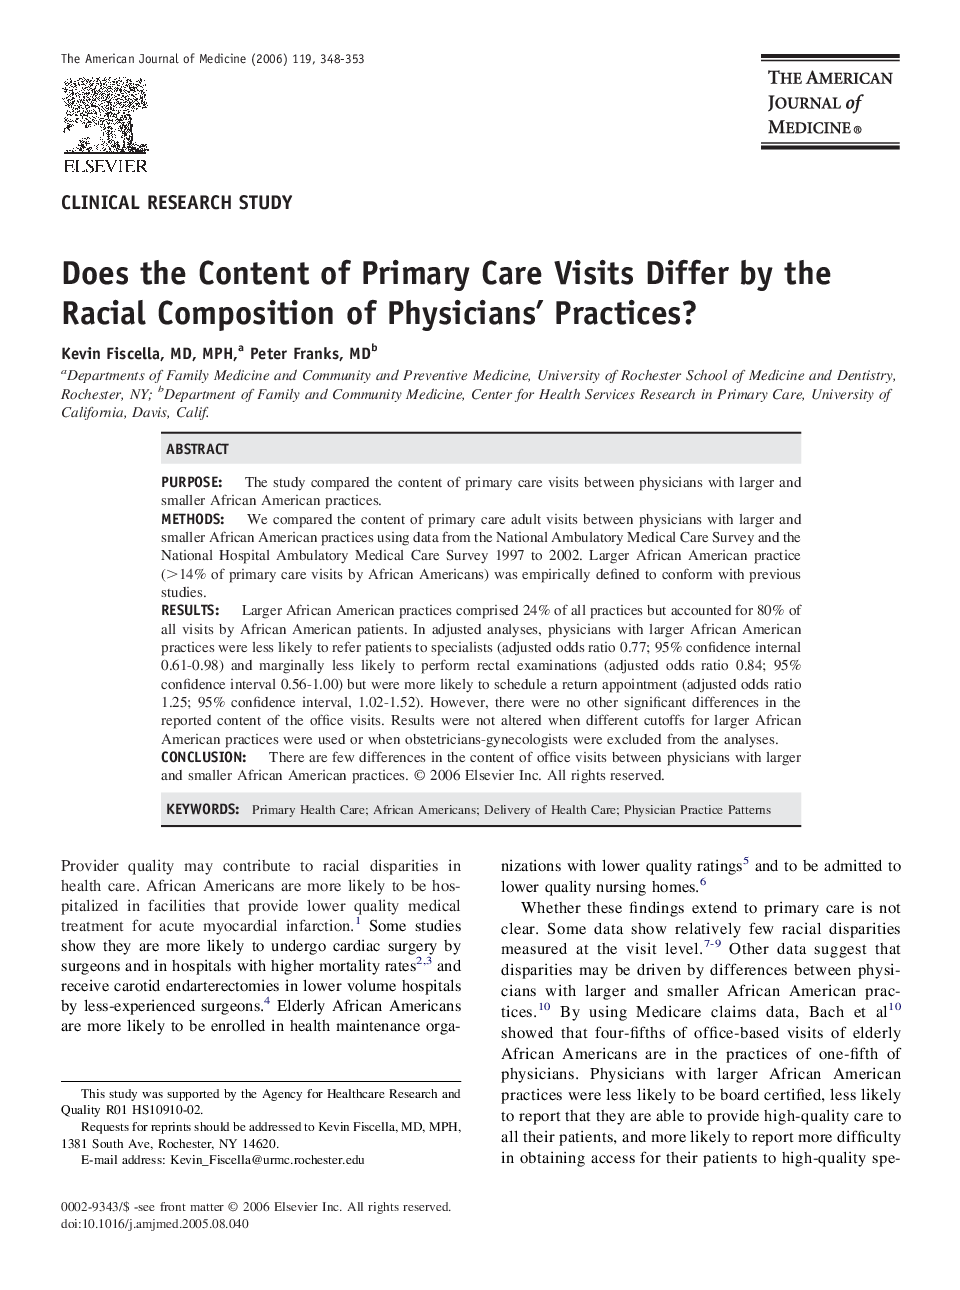 Does the Content of Primary Care Visits Differ by the Racial Composition of Physicians' Practices?